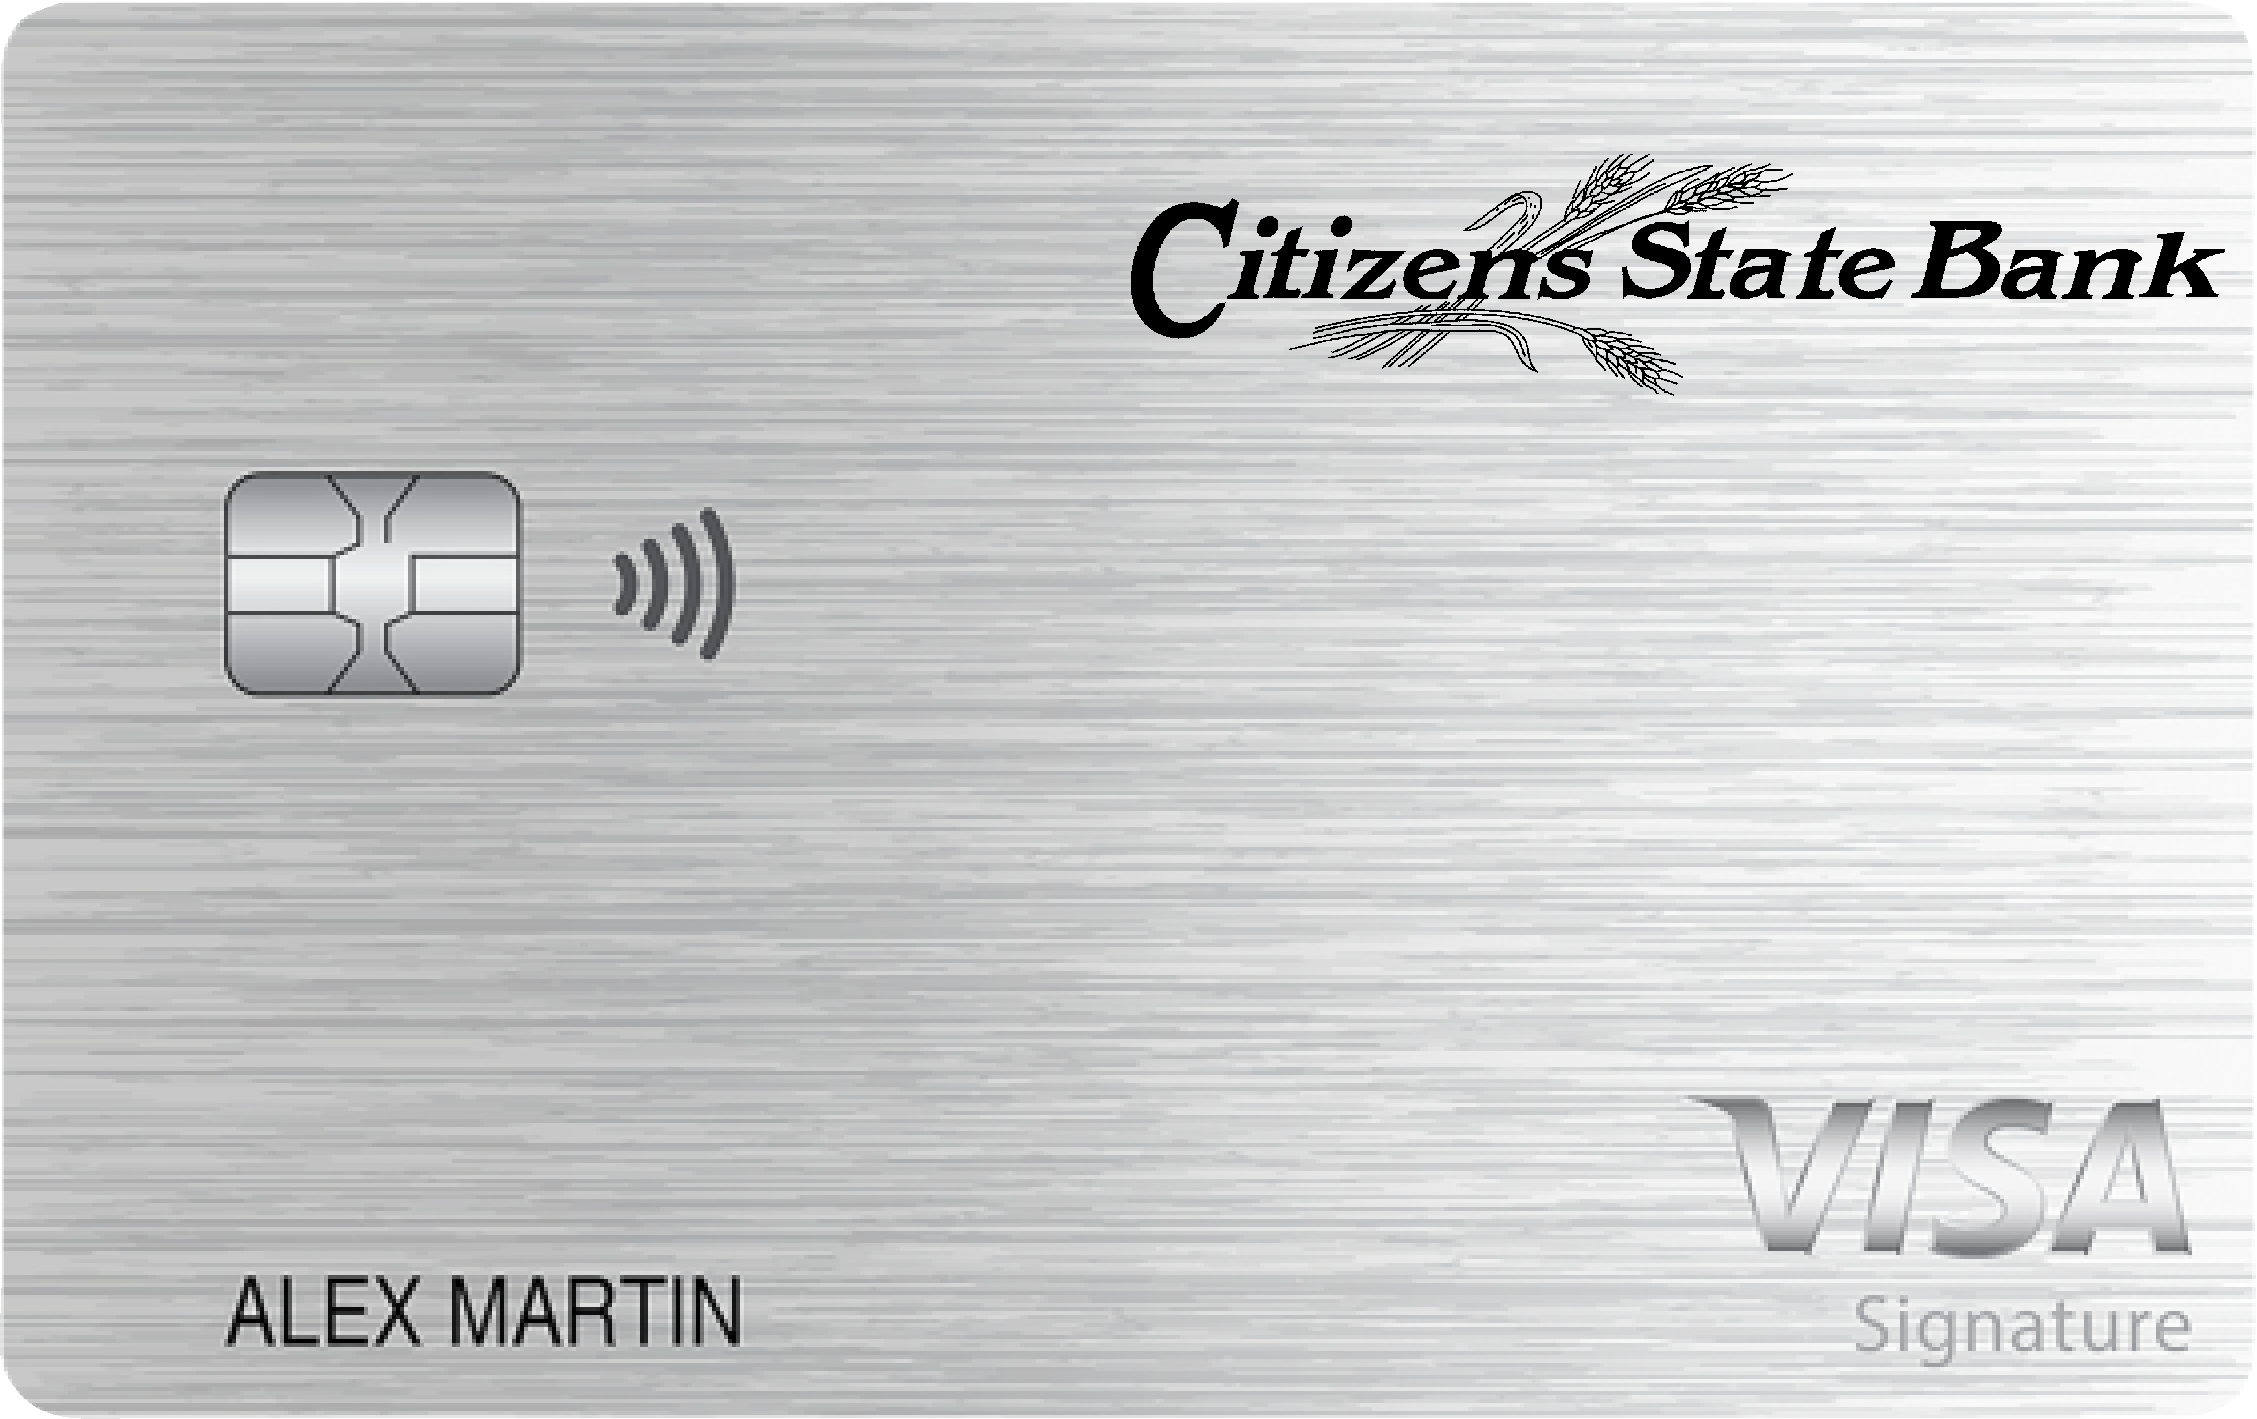 Citizens State Bank Of Lankin Max Cash Preferred Card